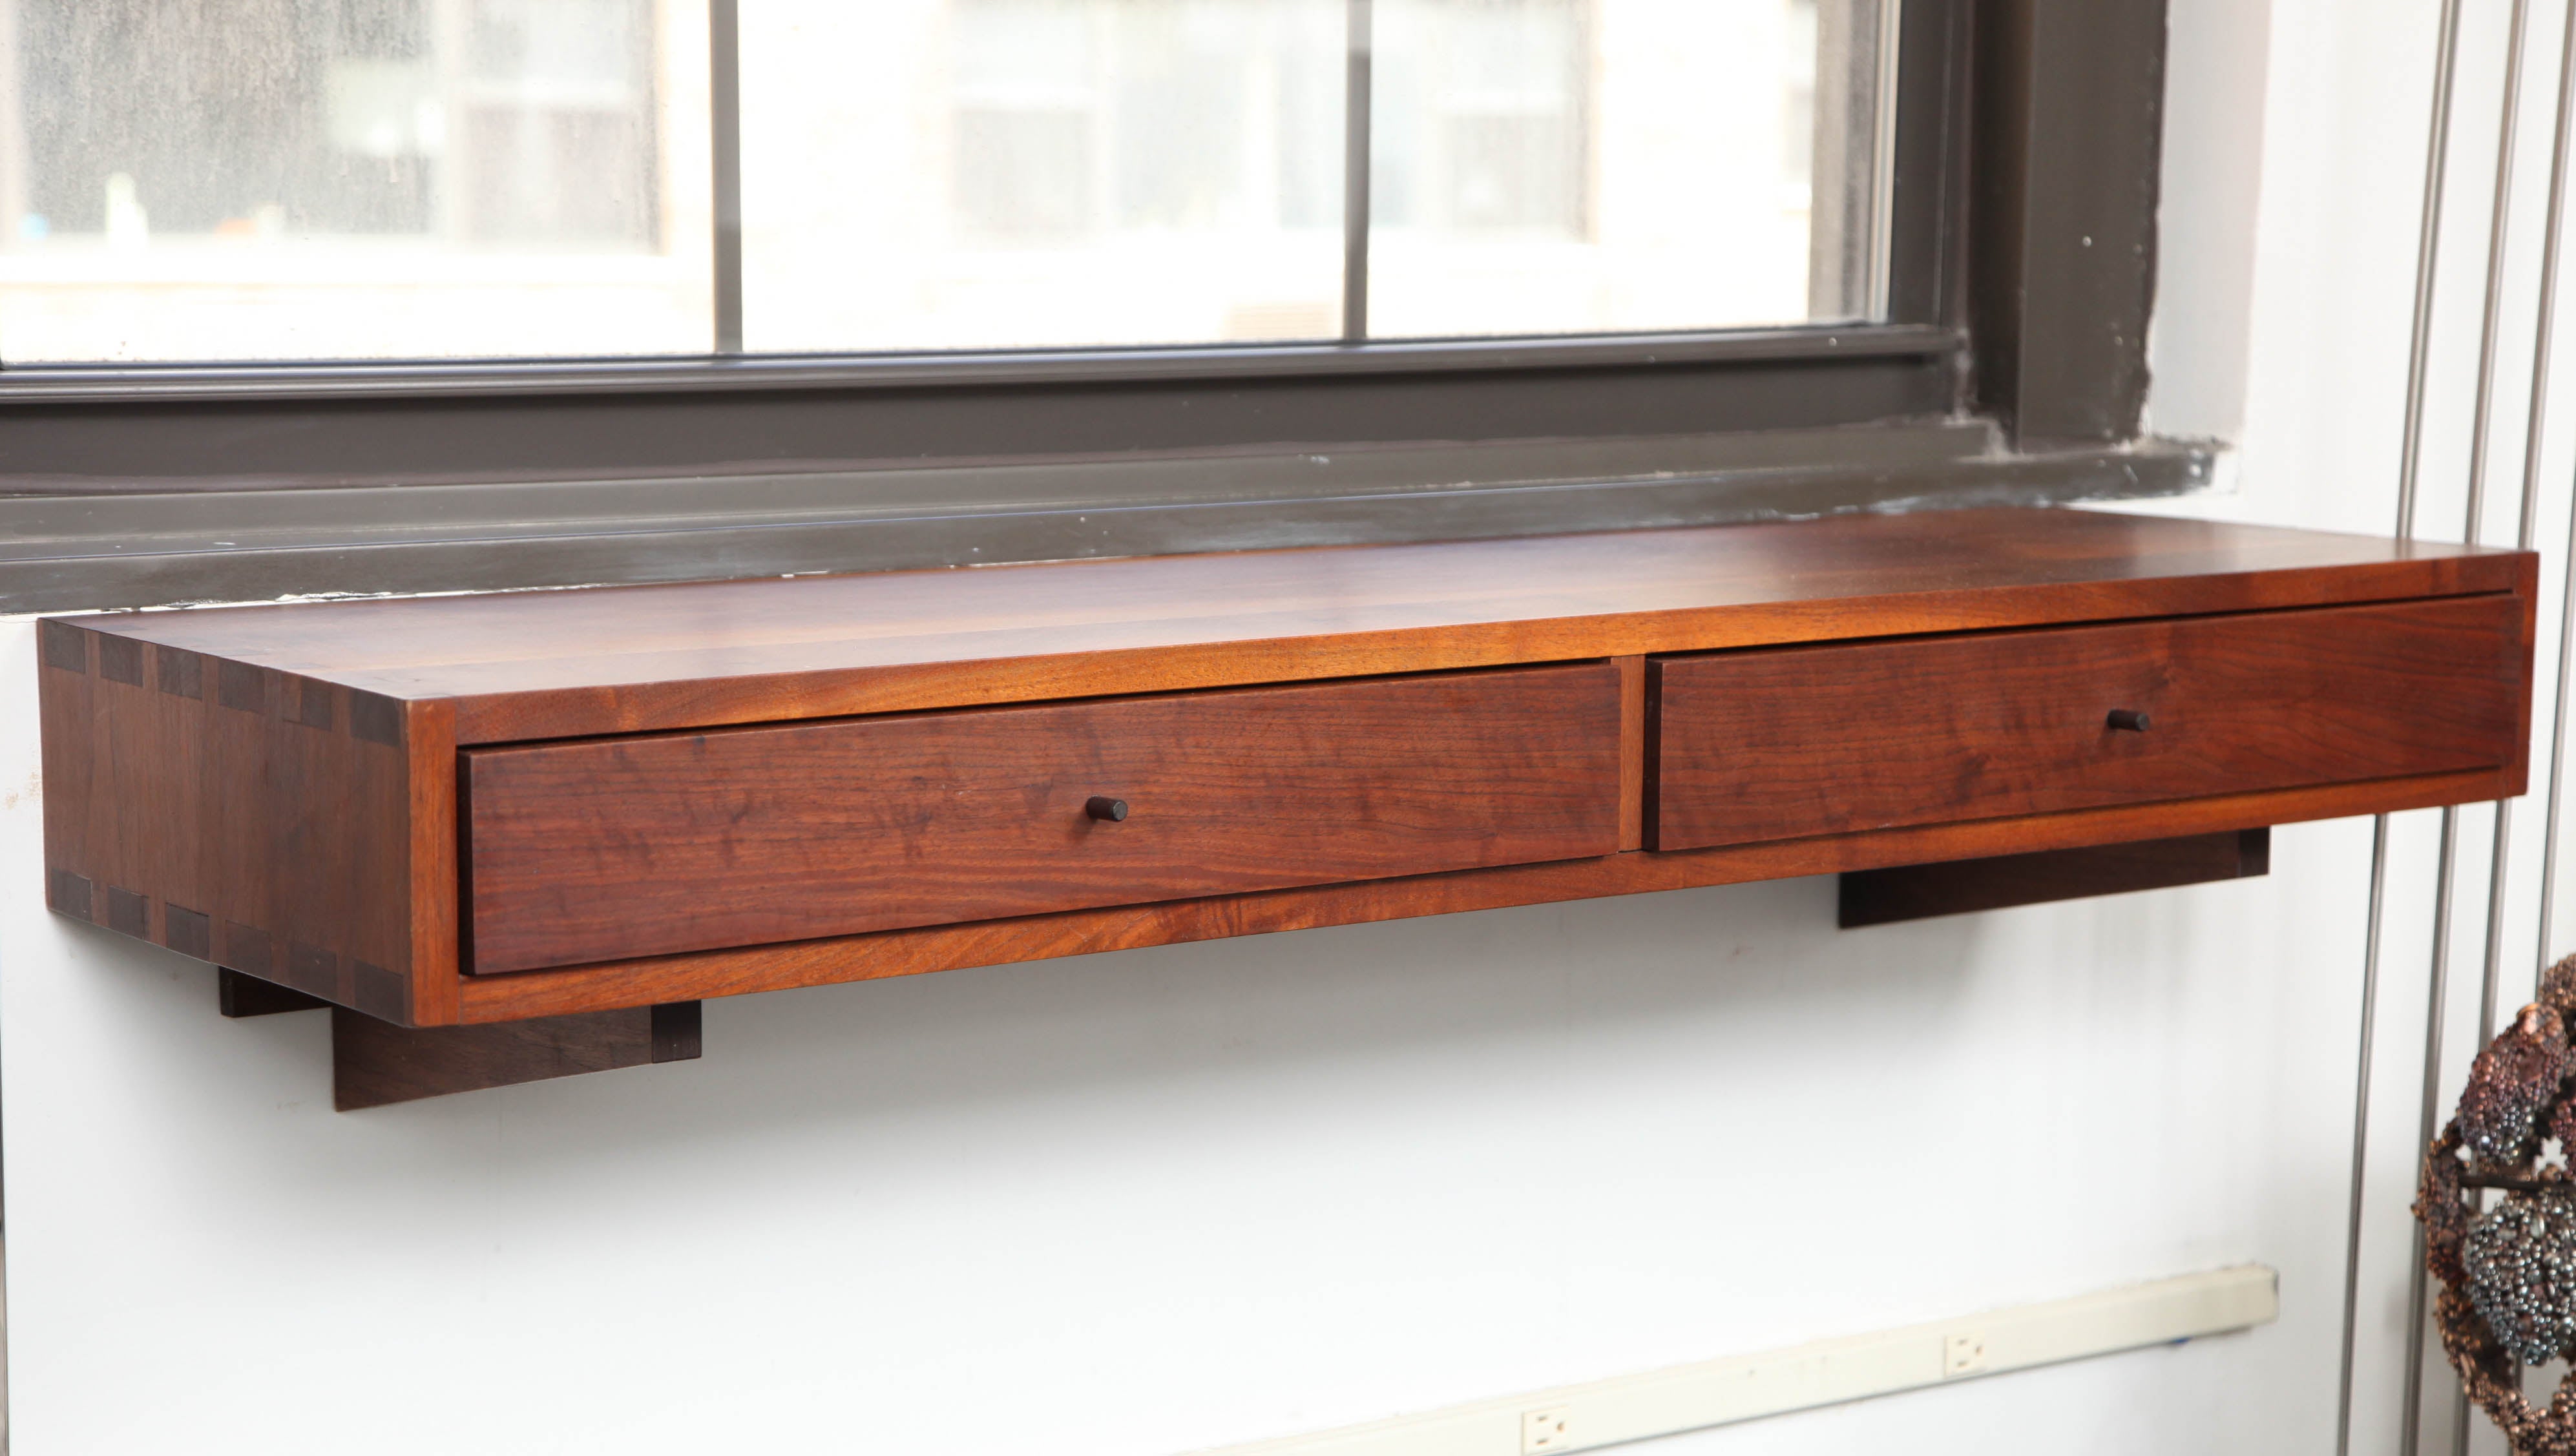 Studio wall shelf made of walnut with two drawers and rosewood pulls. Don Dean made this piece in 1962 while he was attending the School for American Craftsman at Rochester Institute of Technology in Rochester, NY. His professor was Tage Frid and